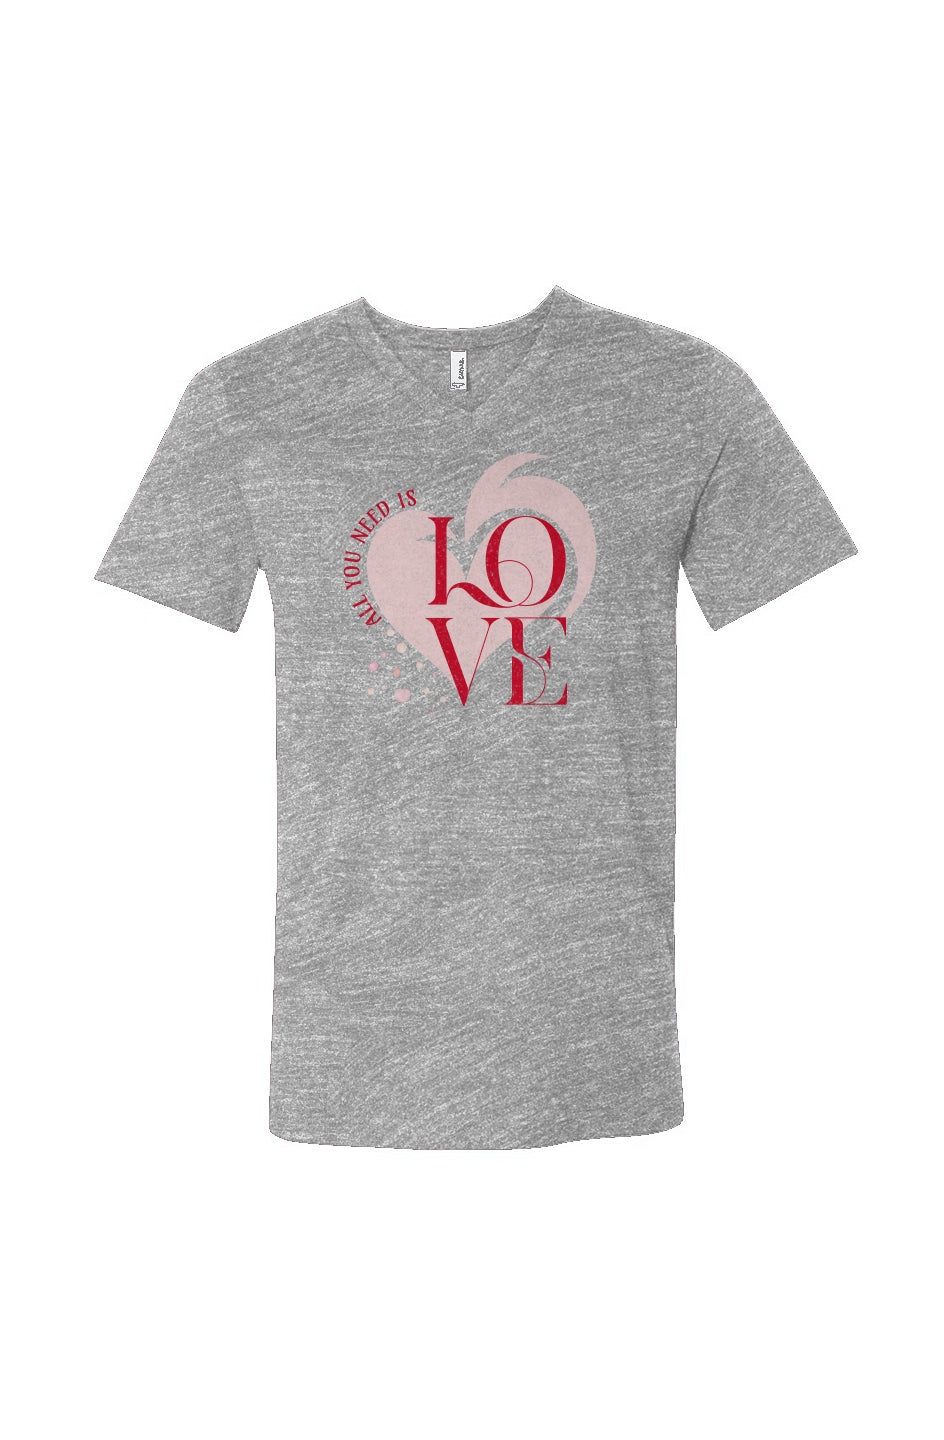 "All you need is Love" V-neck 